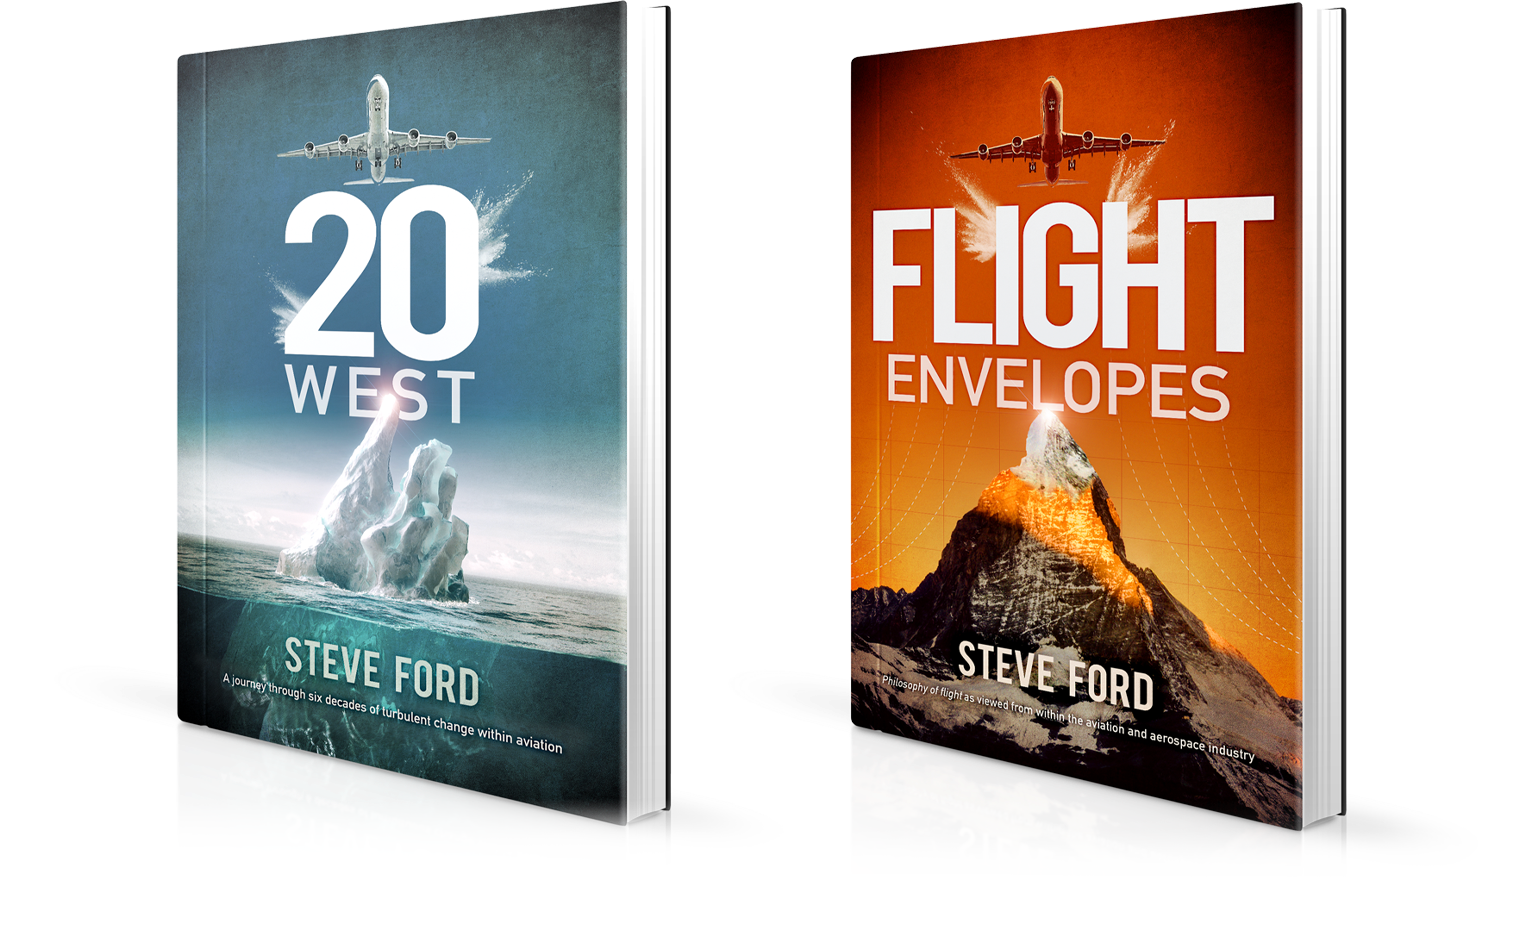 20 West and Flight Envelopes books by author Steve Ford